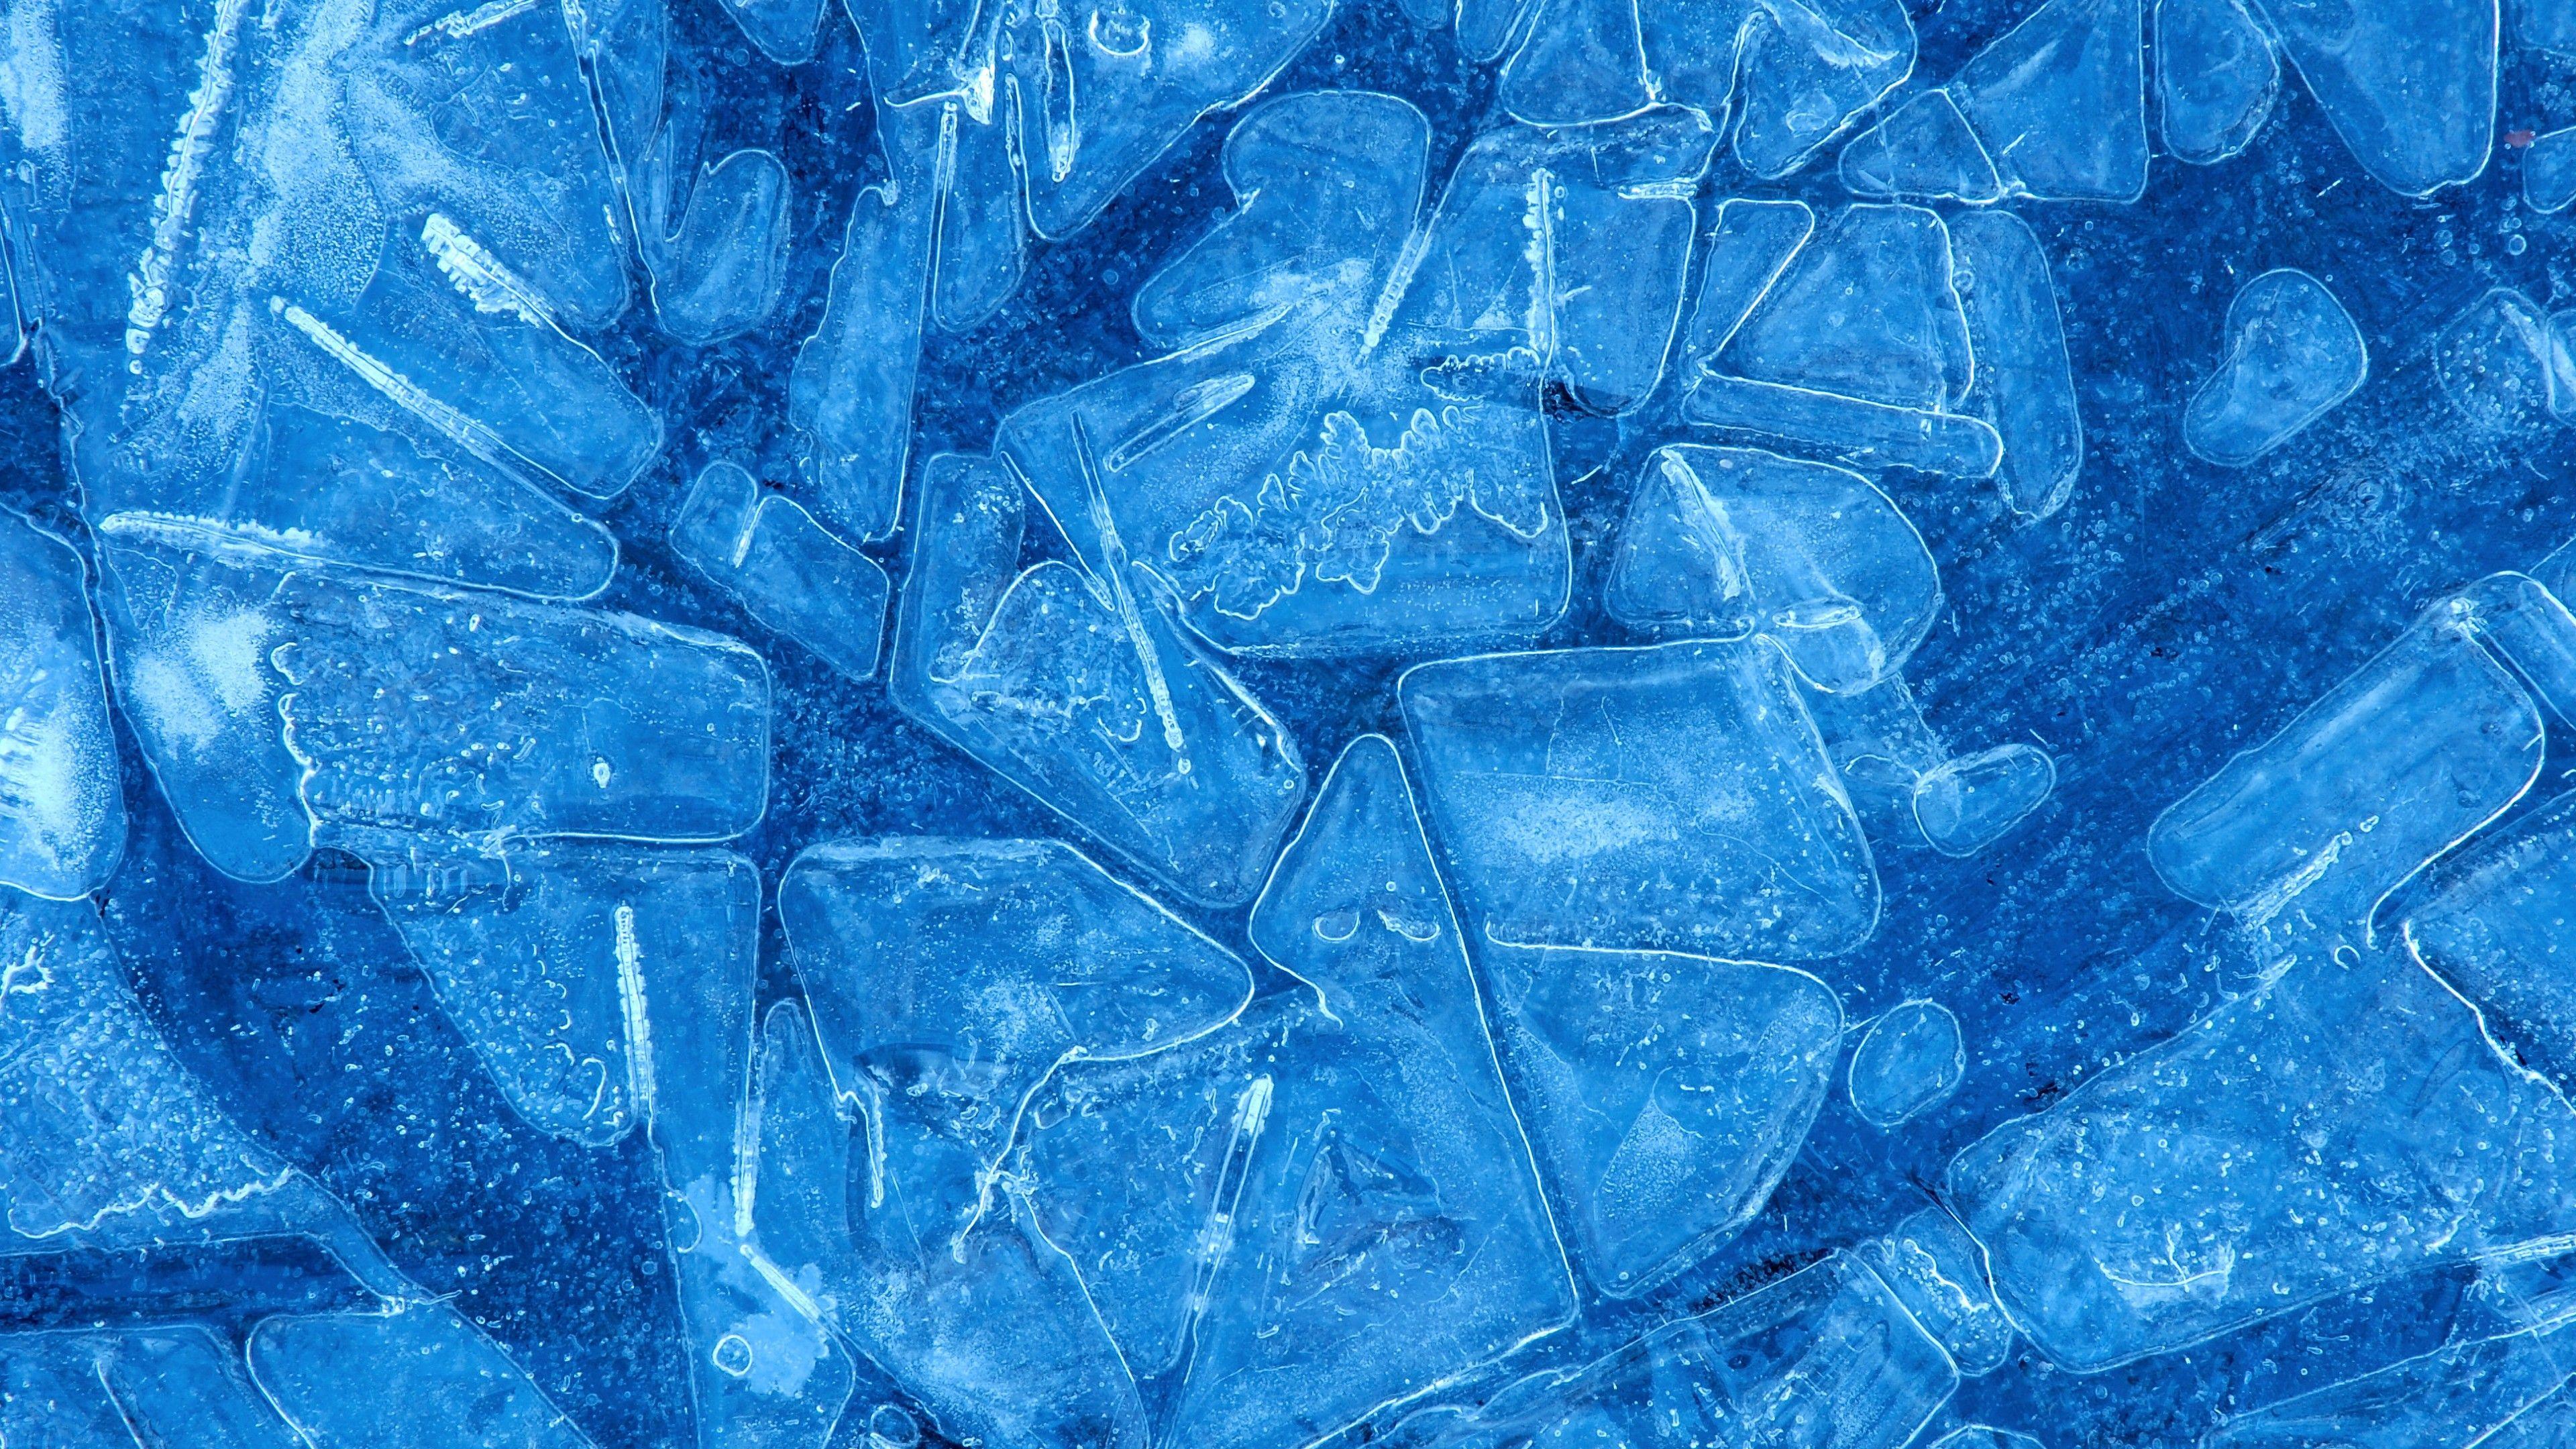 Ice Hd Wallpapers Top Free Ice Hd Backgrounds Wallpaperaccess Images